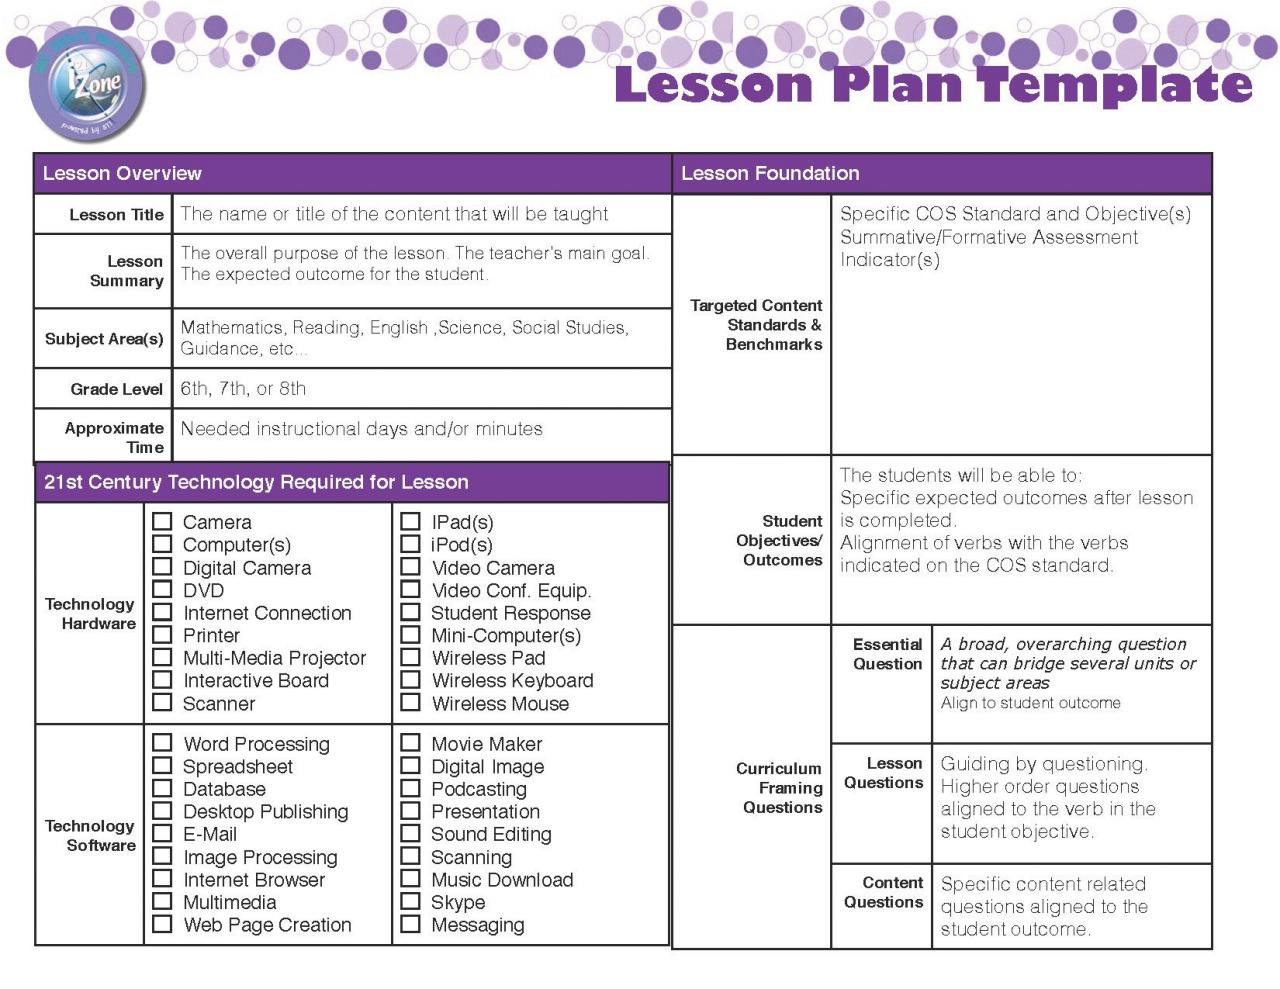 An example of a lesson plan template